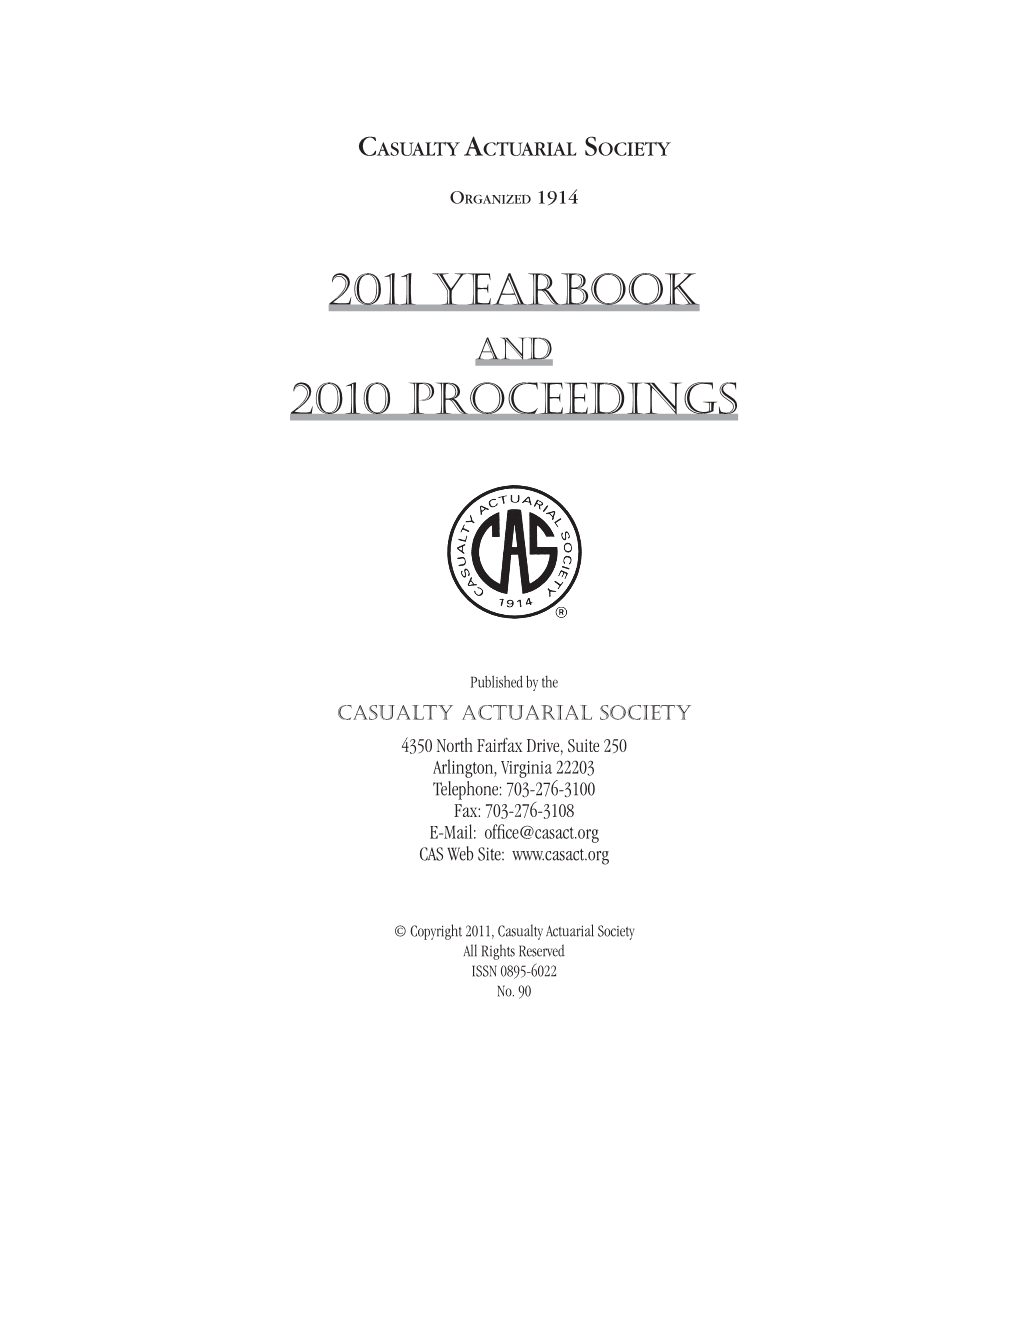 2011 YEARBOOK and 2010 Proceedings